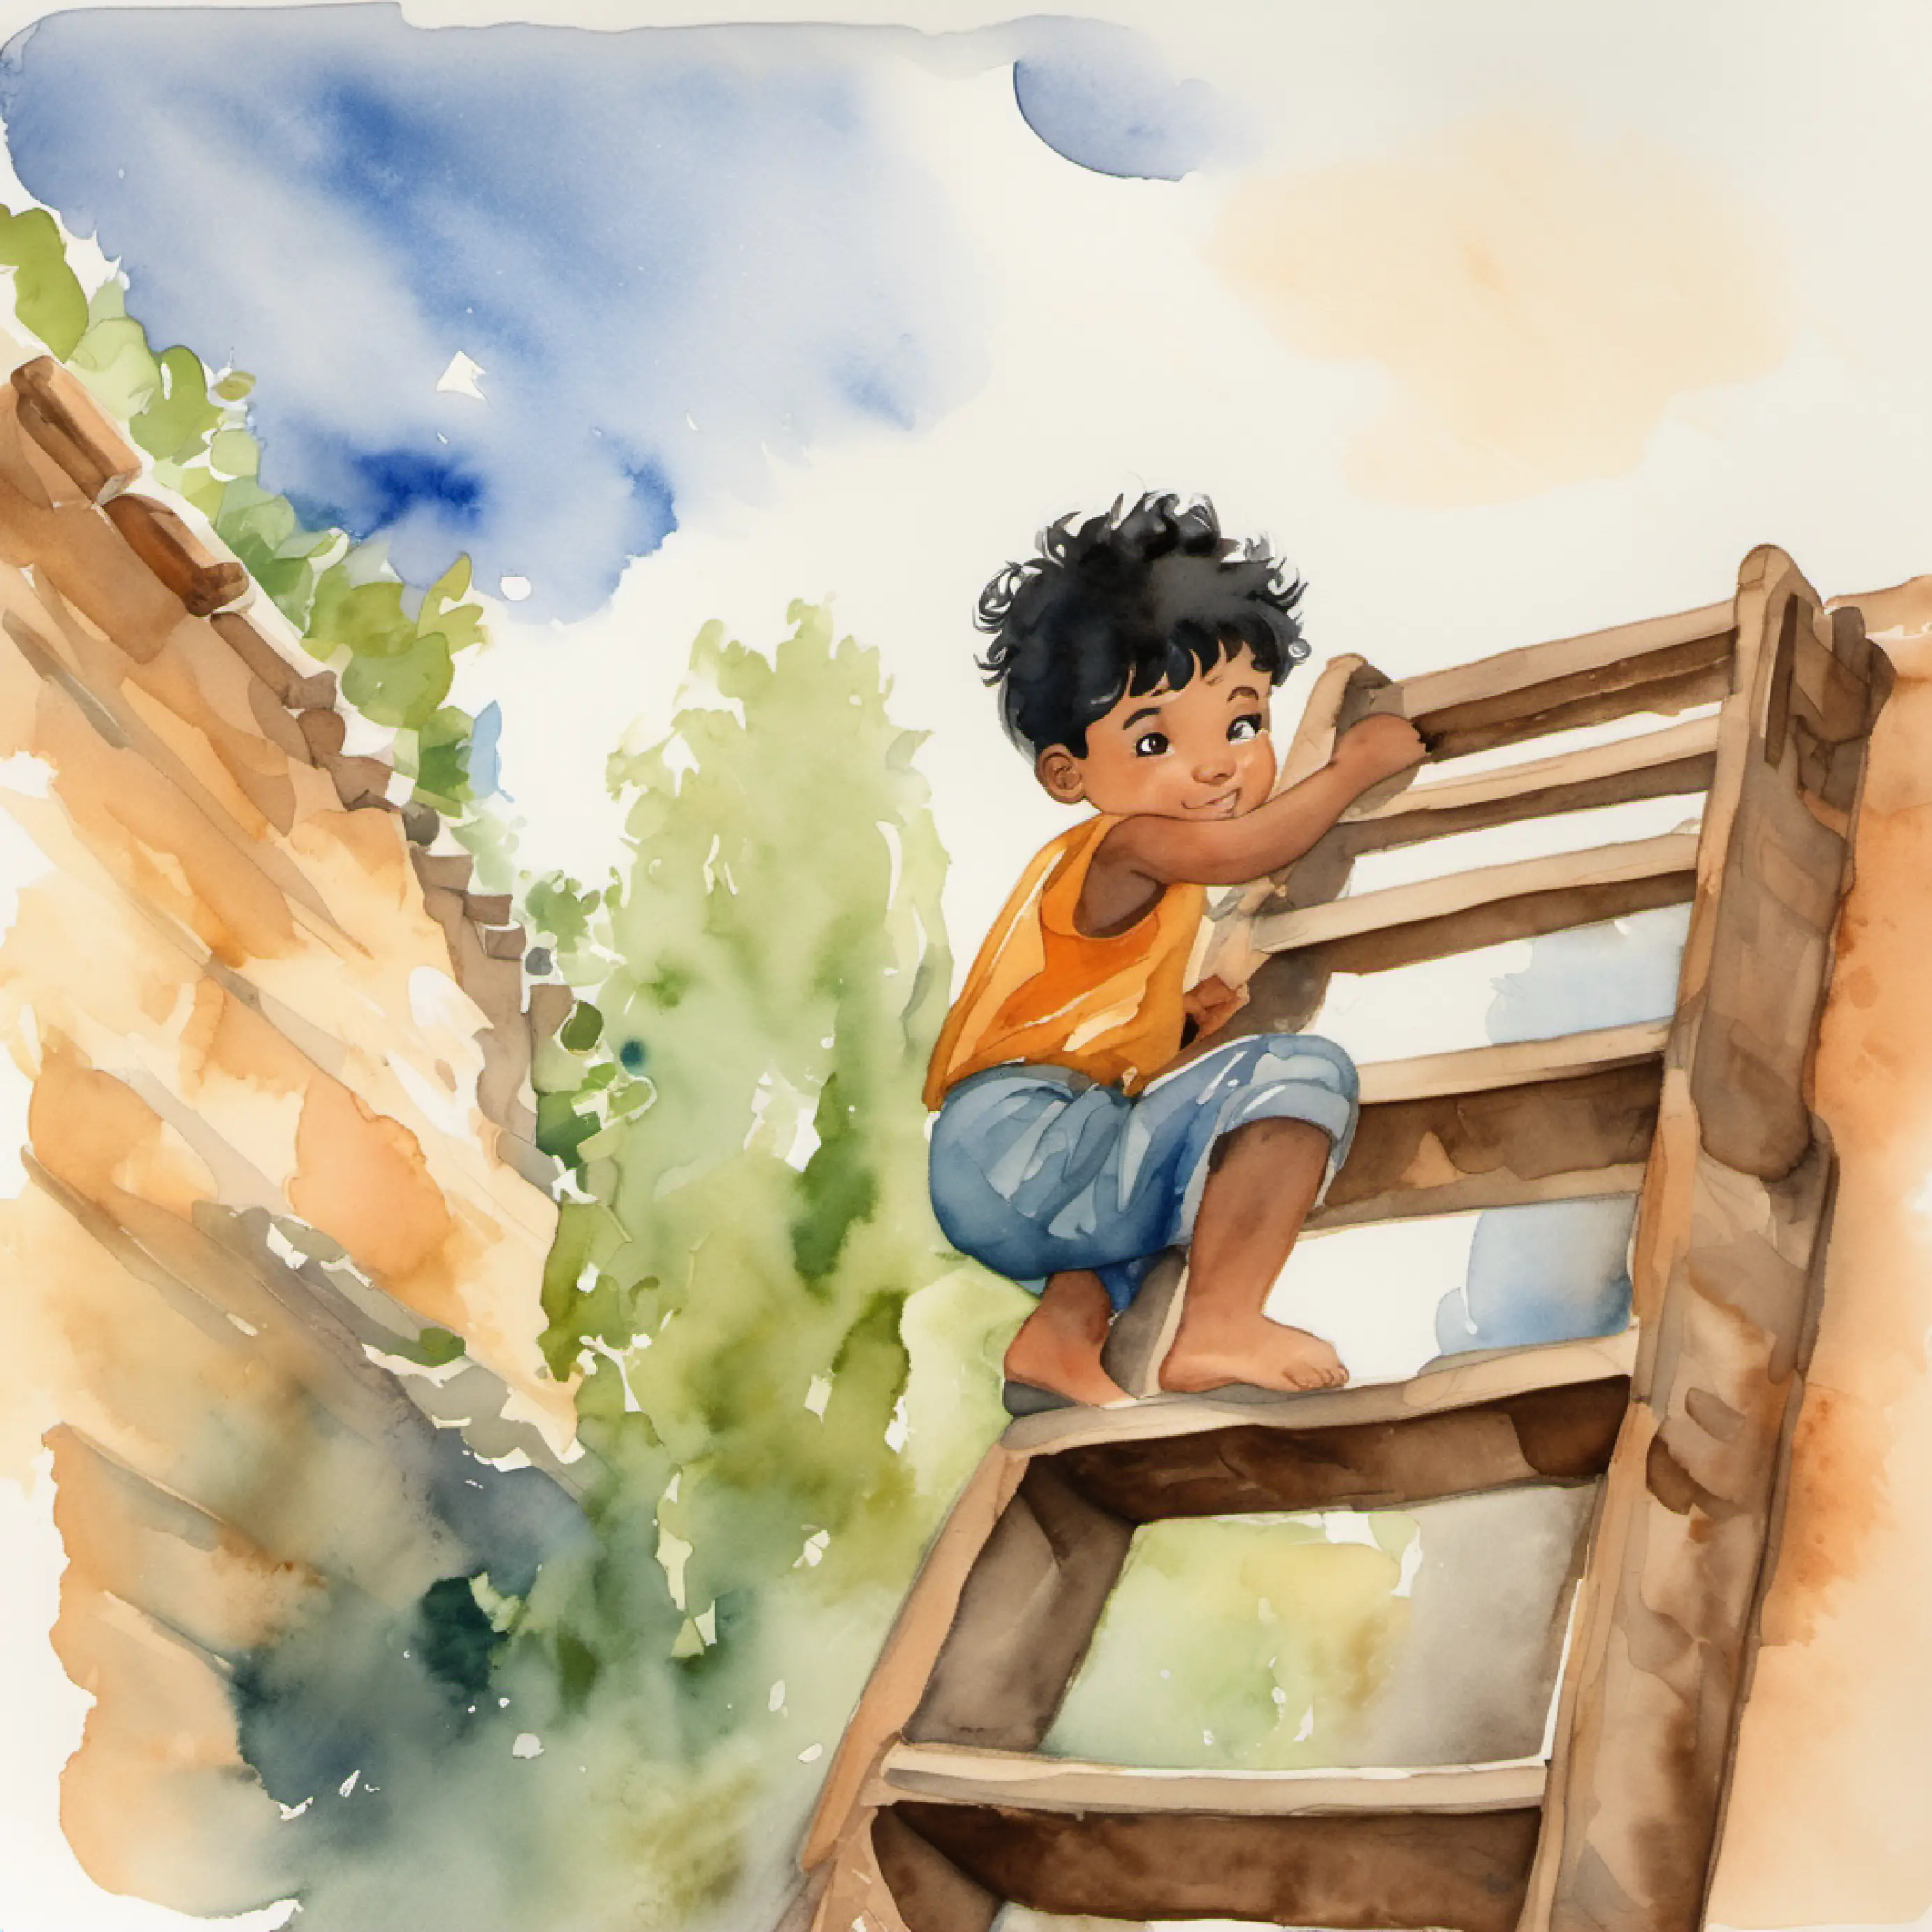 They make a ladder; Boy with black hair, tan skin, and brown eyes begins to climb.